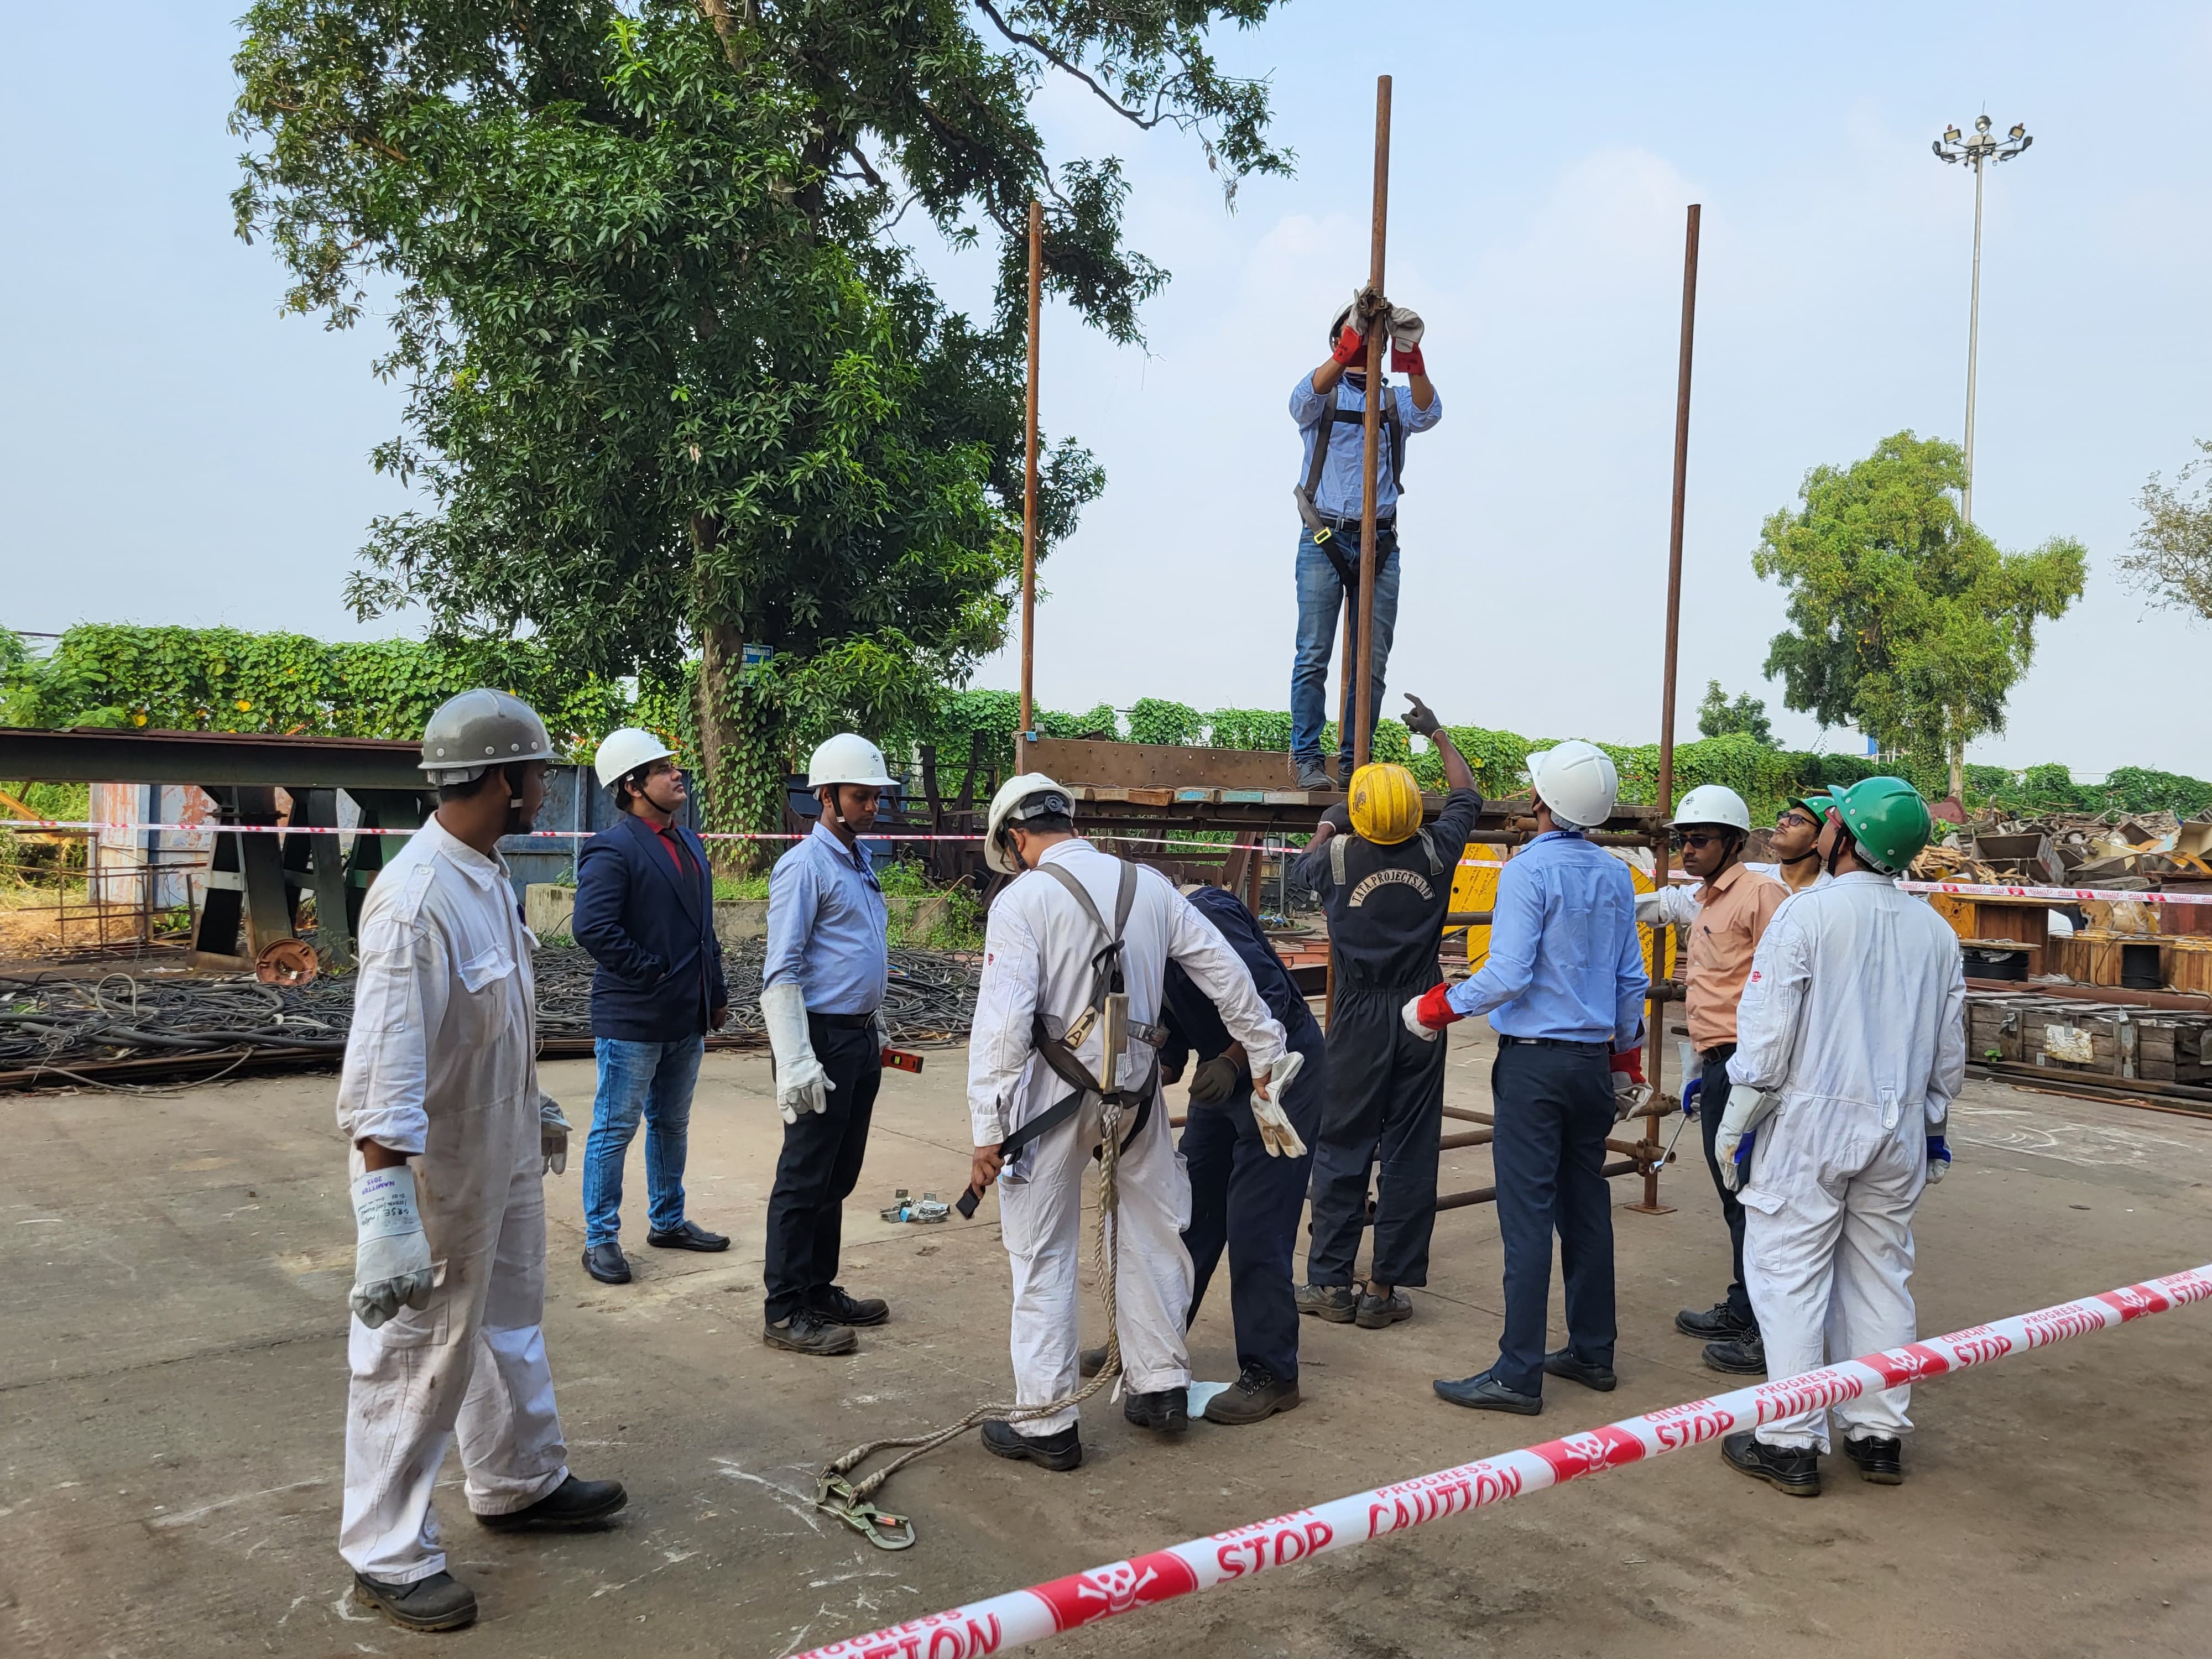 Awareness Training on Scaffolding for employees on 18 Oct 23